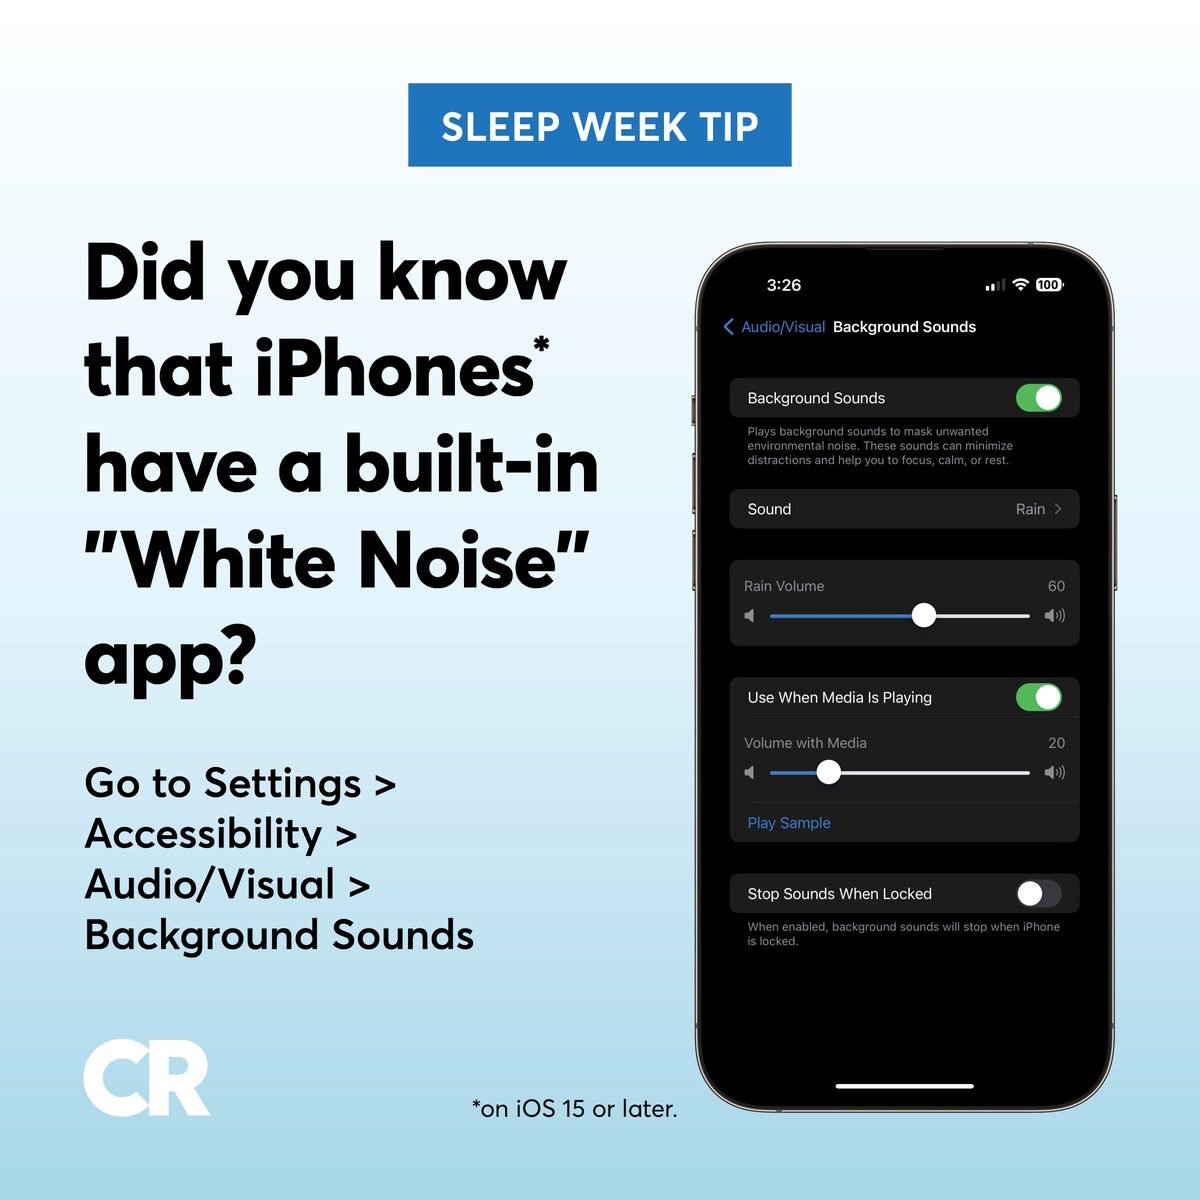 A white noise machine can help block out distractions and help you sleep. See other smartphone settings to help you sleep. #SleepAwarenessWeek consumerreports.org/electronics-co…